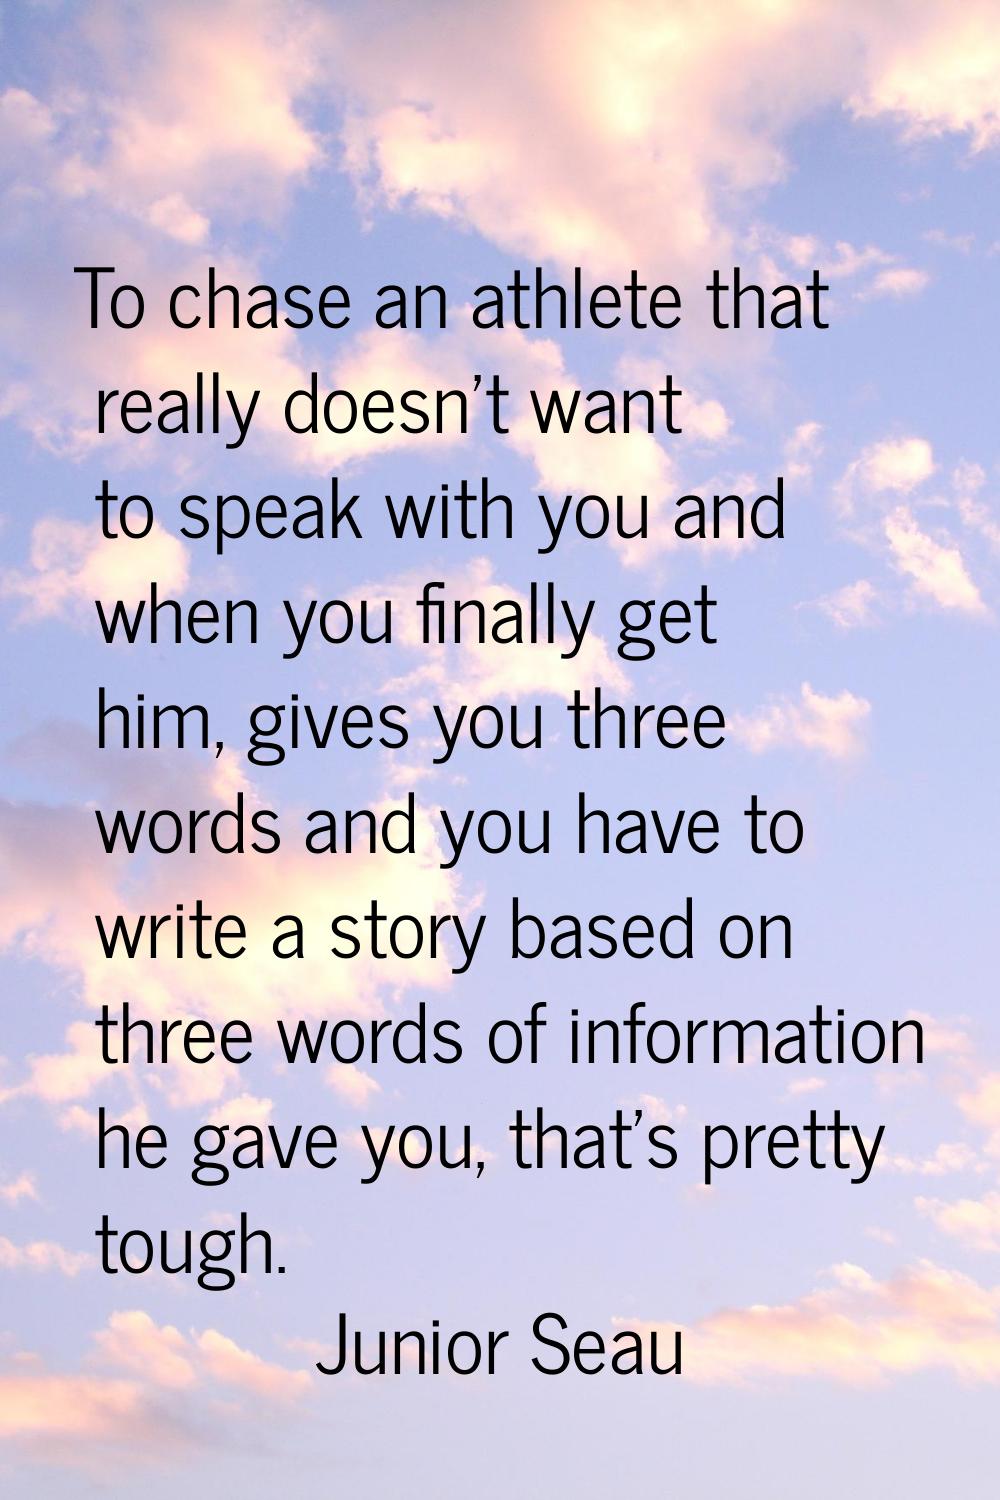 To chase an athlete that really doesn't want to speak with you and when you finally get him, gives 